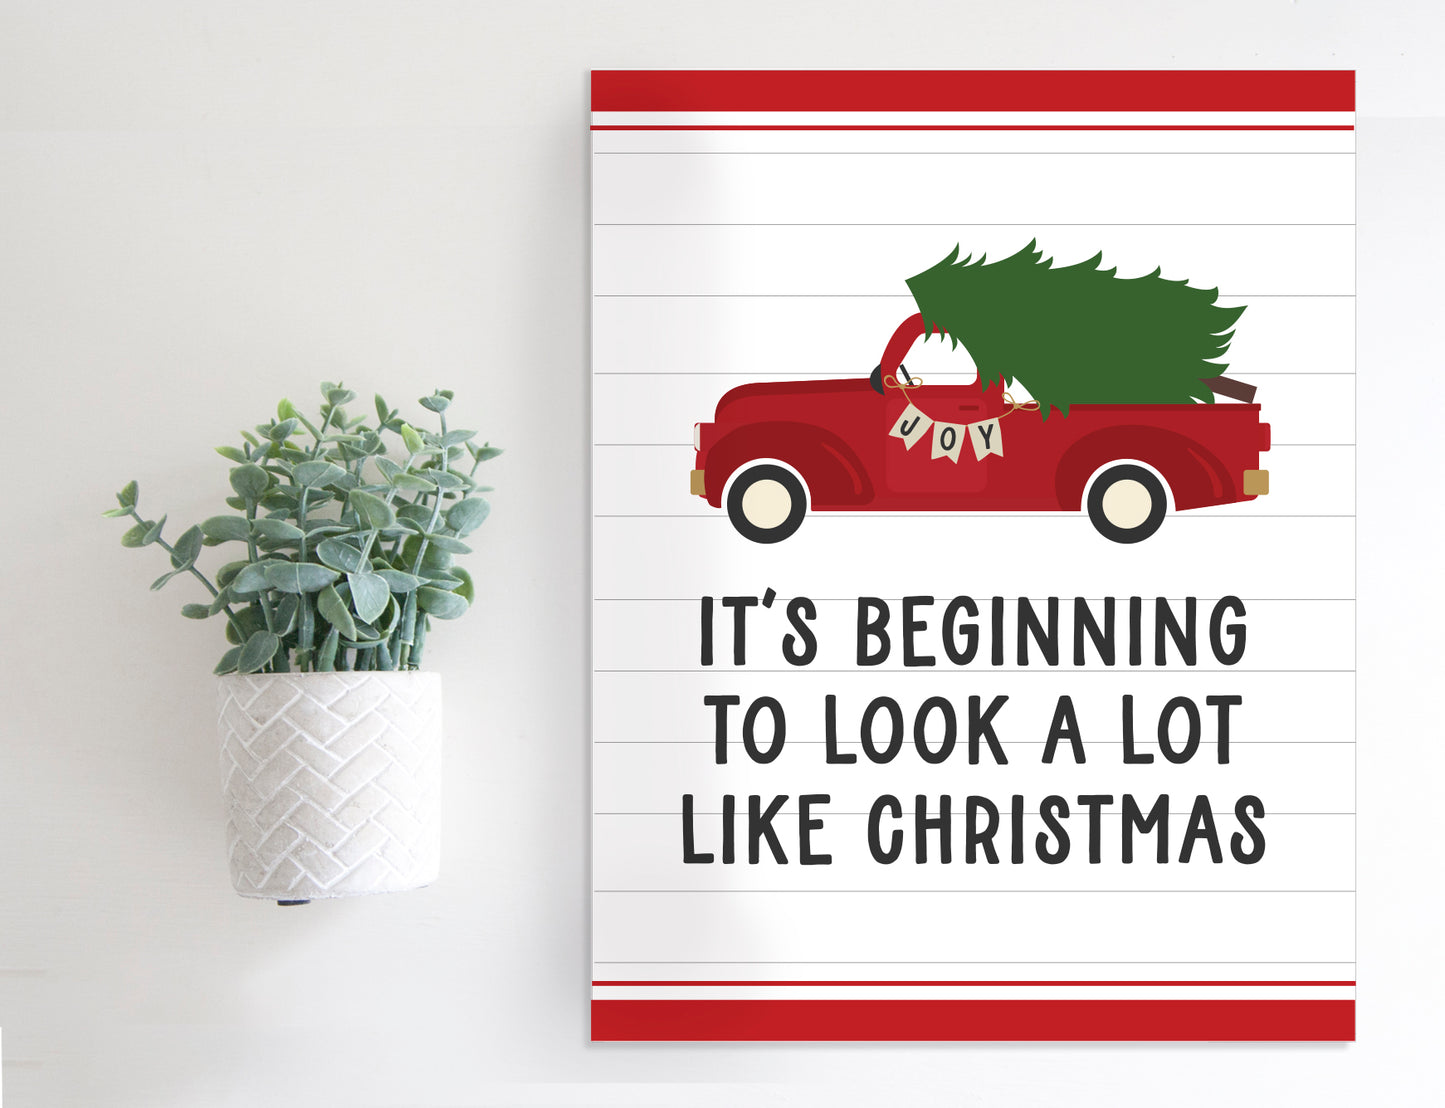 Magnetic Wall Hanging Insert: A Lot Like Christmas Truck and Tree (Christmas/Winter) | INSERT ONLY